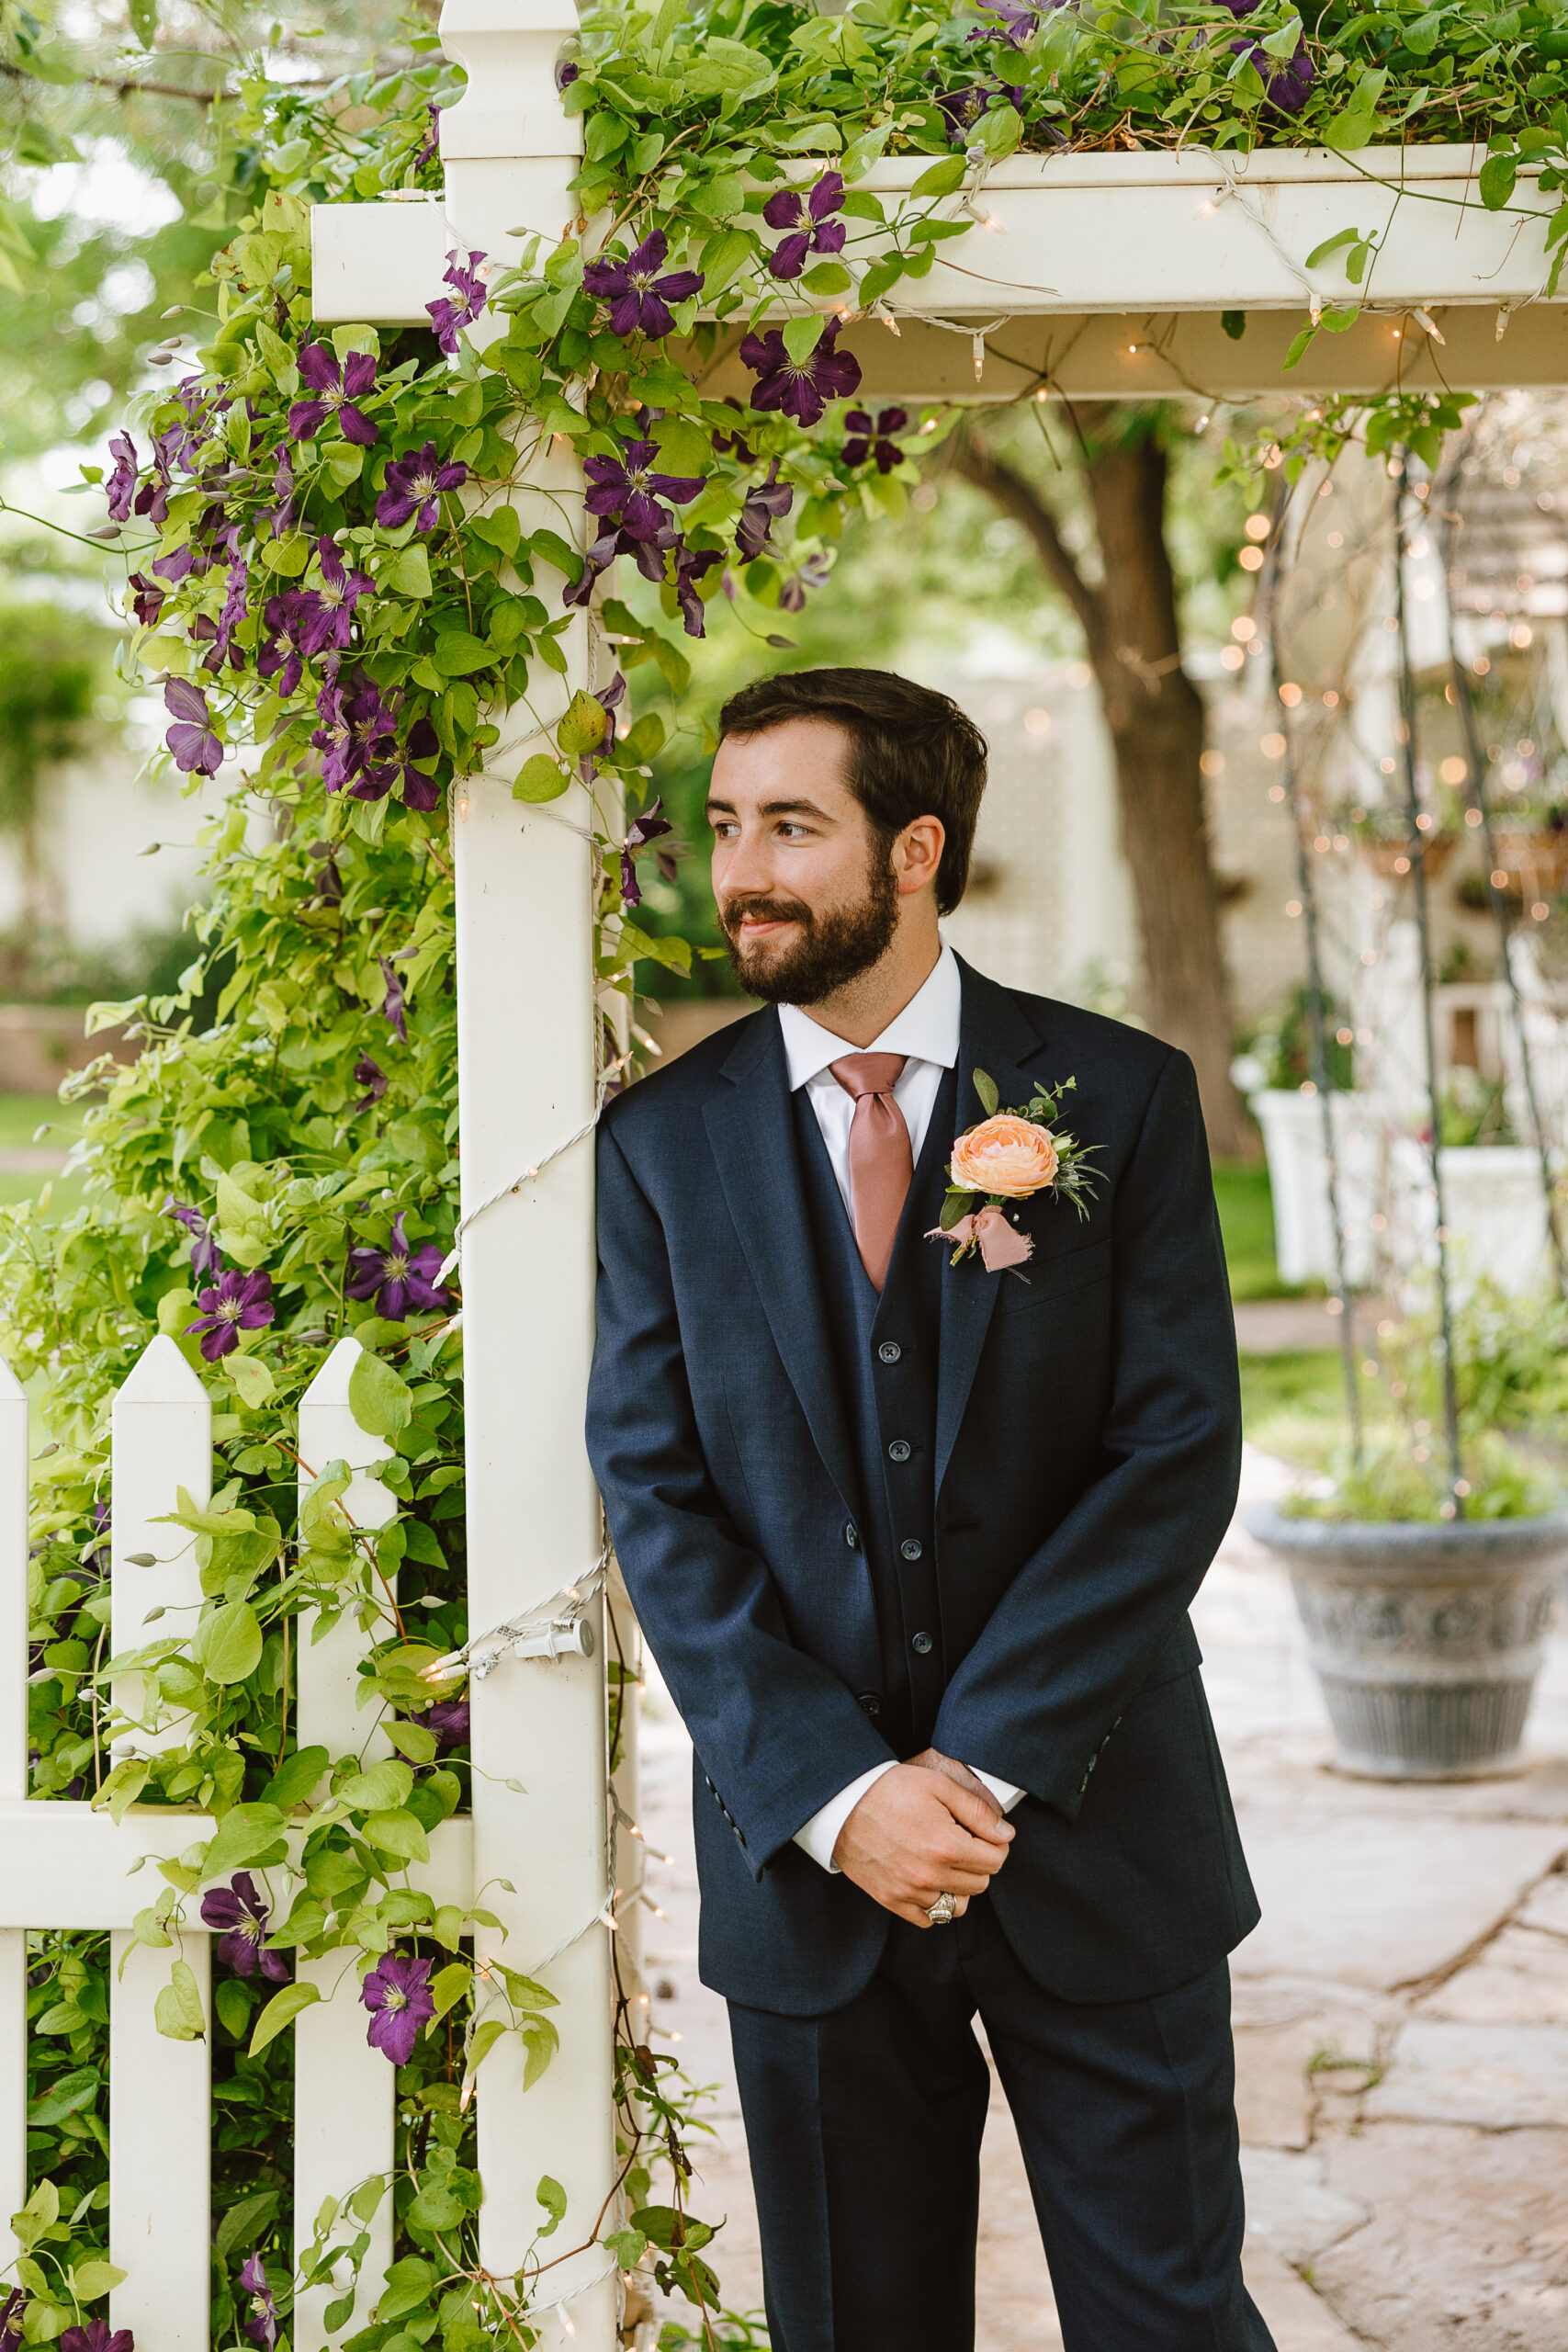 Groom at Country Home Weddings
